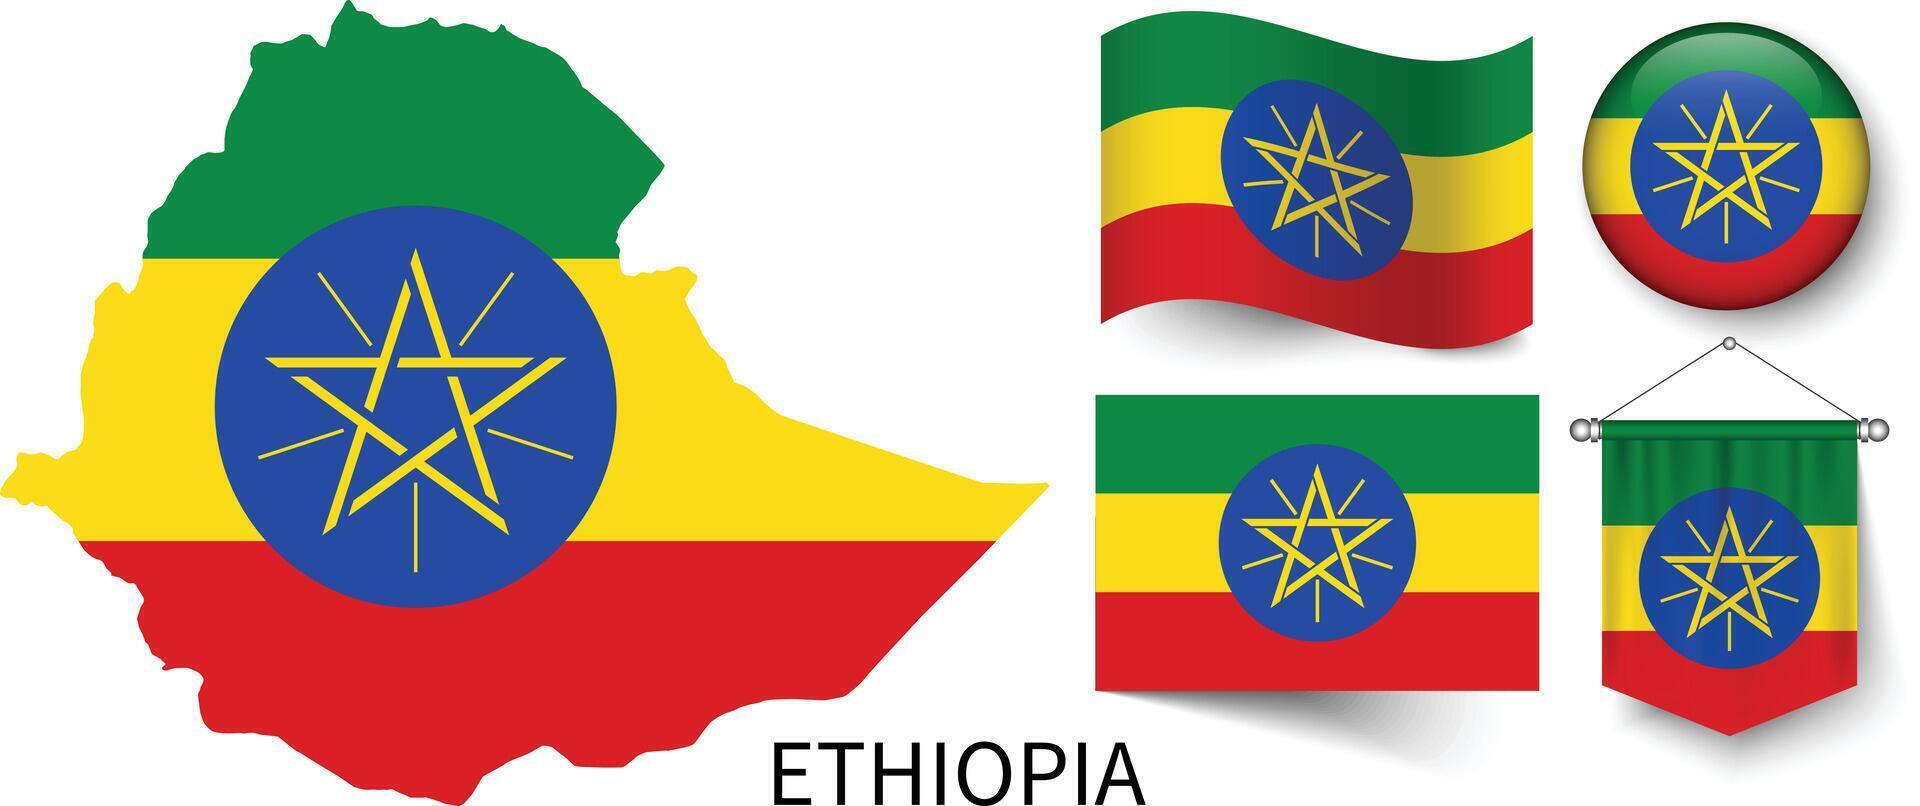 The various patterns of the Ethiopia national flags and the map of Ethiopia's borders vector